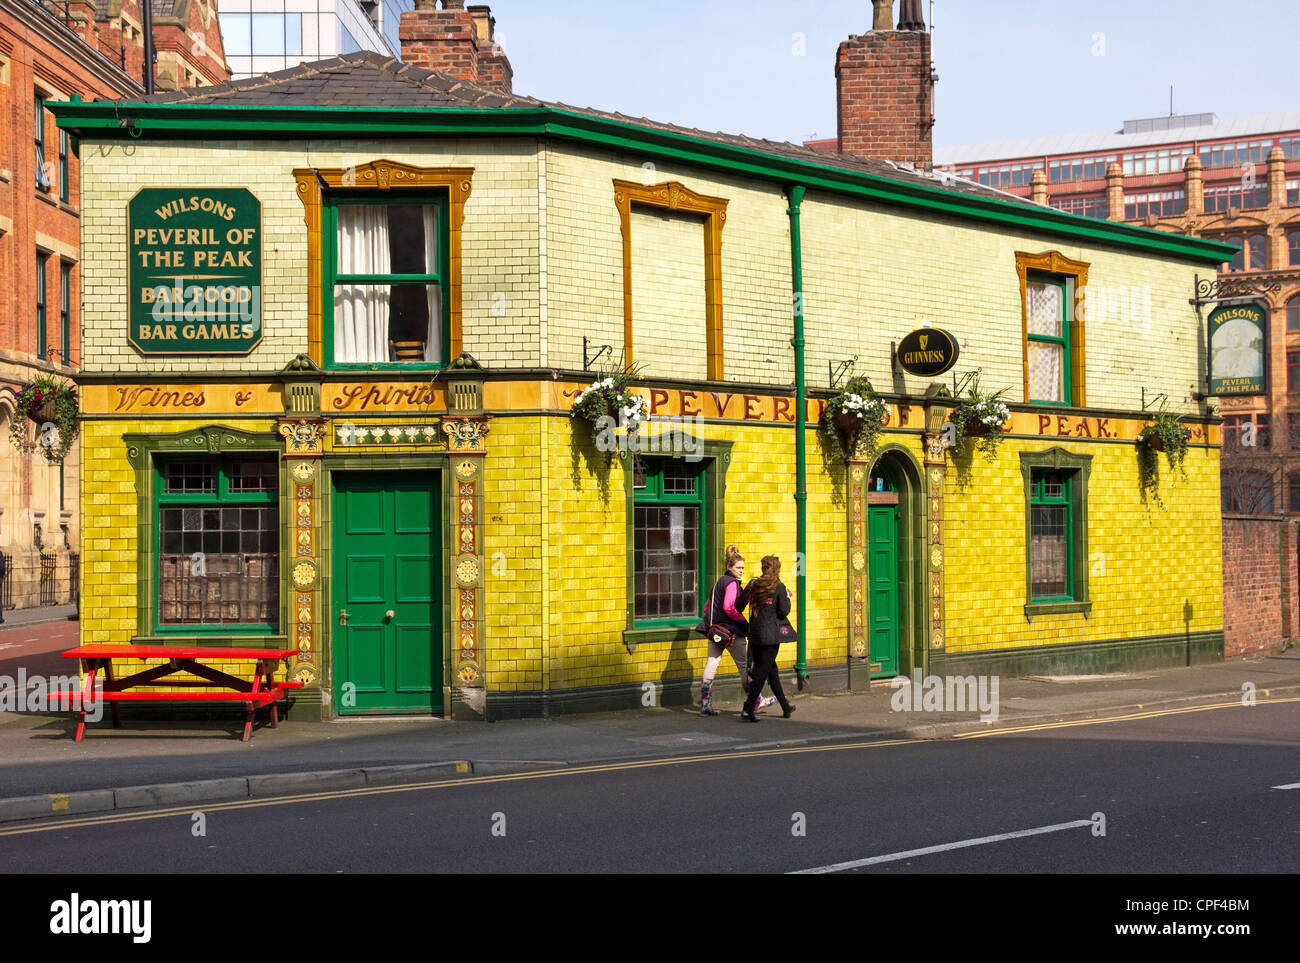 Peveril of the Peak pub, Great Bridgewater Street, City Centre, Manchester, Angleterre, RU Banque D'Images